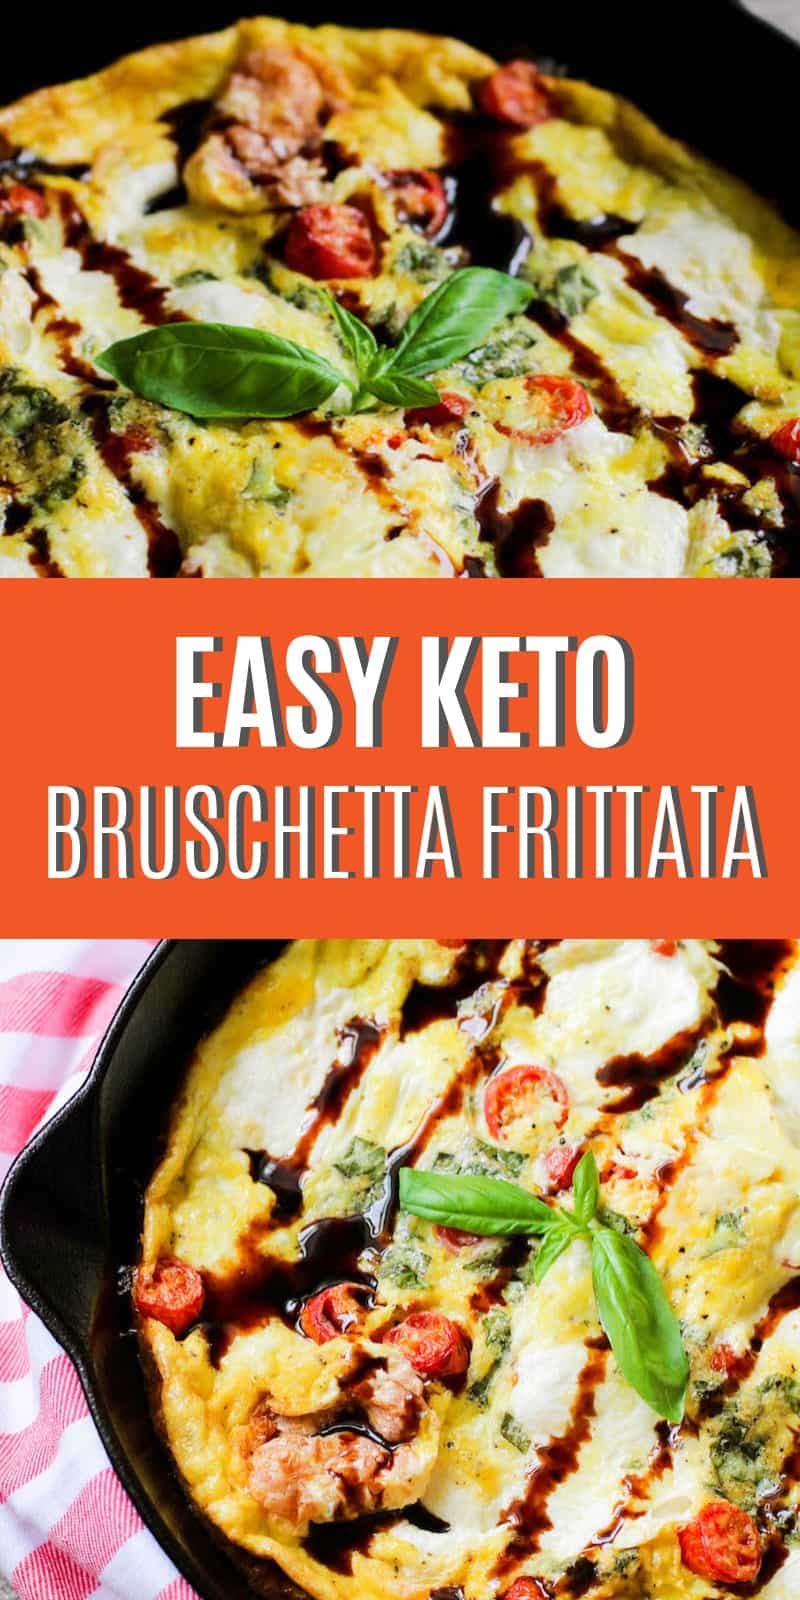 This Easy Keto Bruschetta Frittata Recipe takes your eggs to a whole new level!  I promise your family will love this recipe!  It's SO easy to make too!